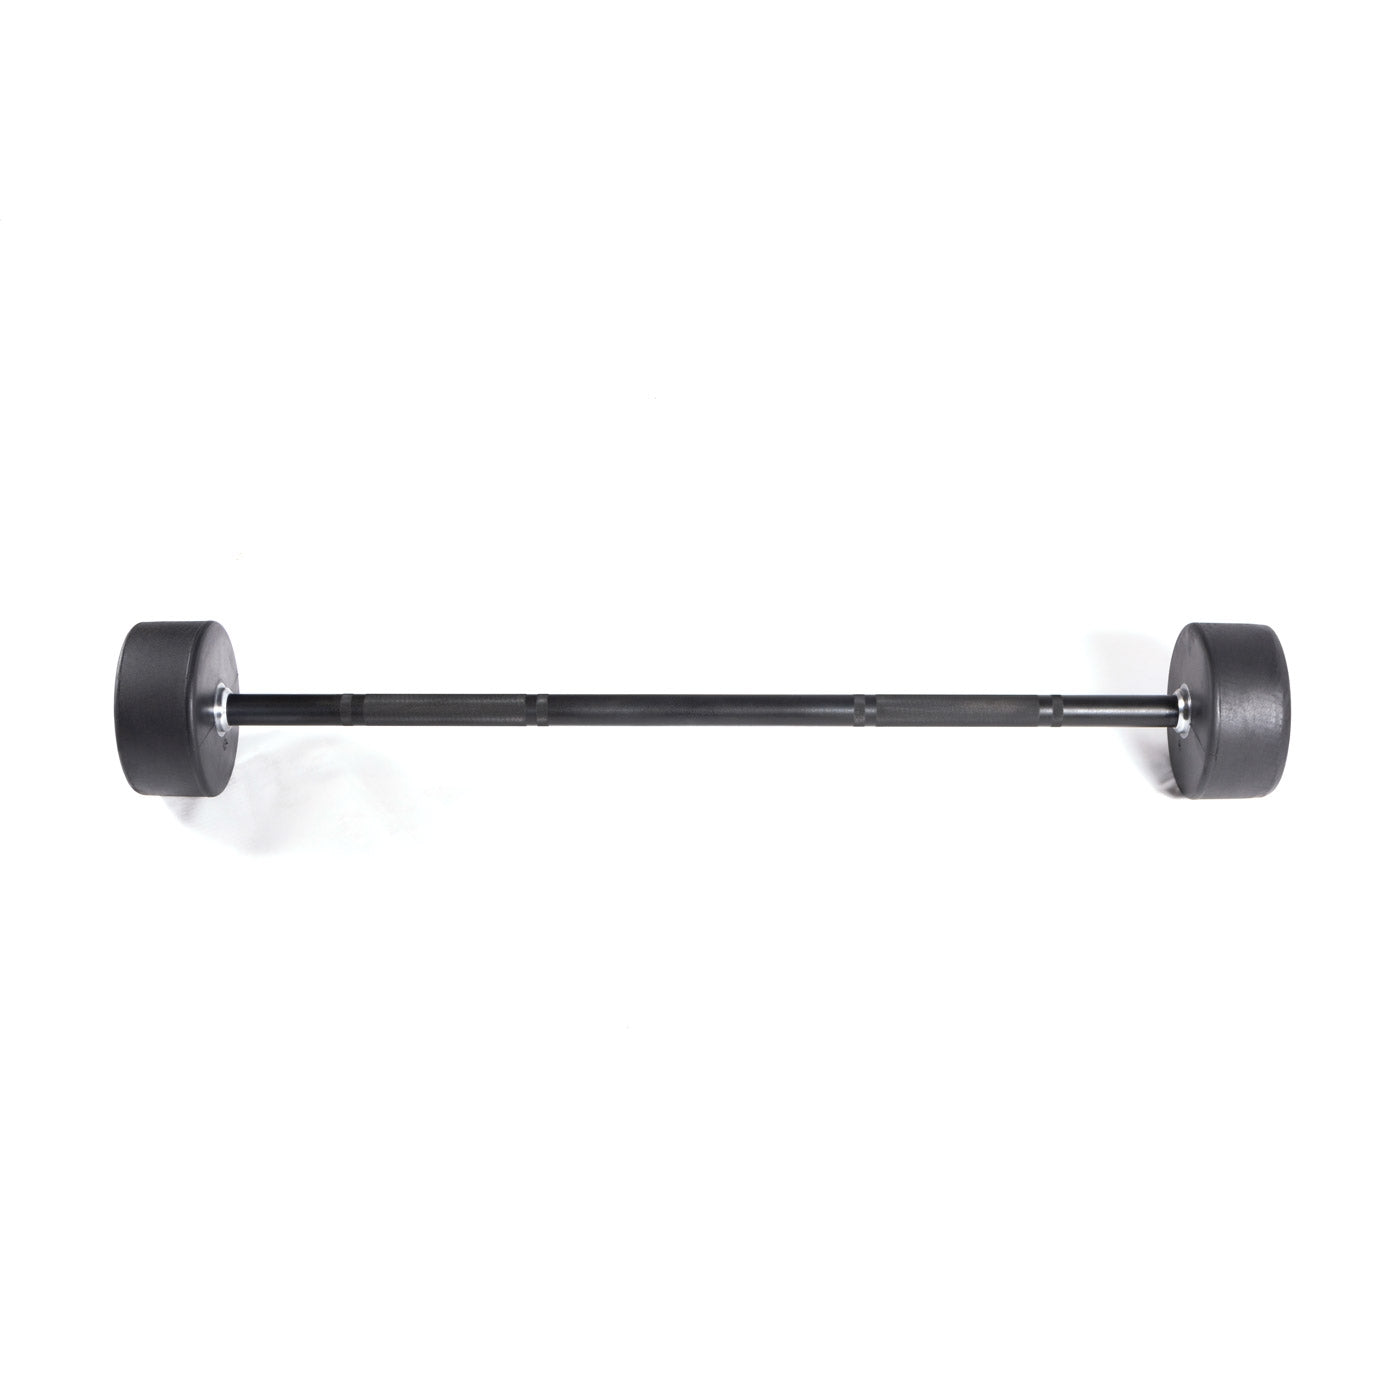 a preloaded rubber barbell with a stainless steel bar